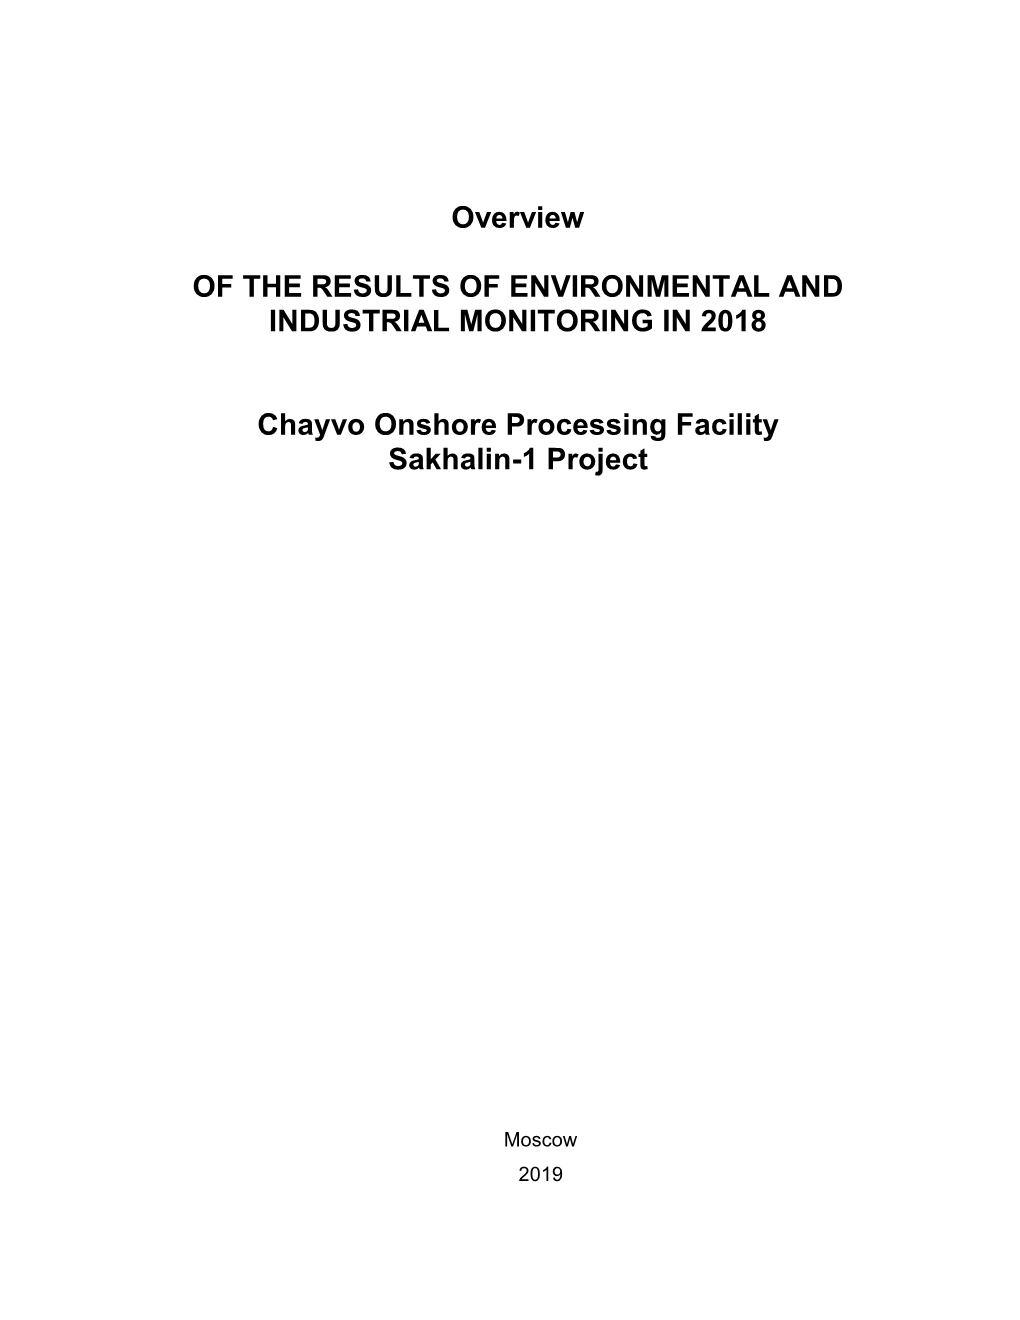 Environmental Monitoring and Industrial Control Results